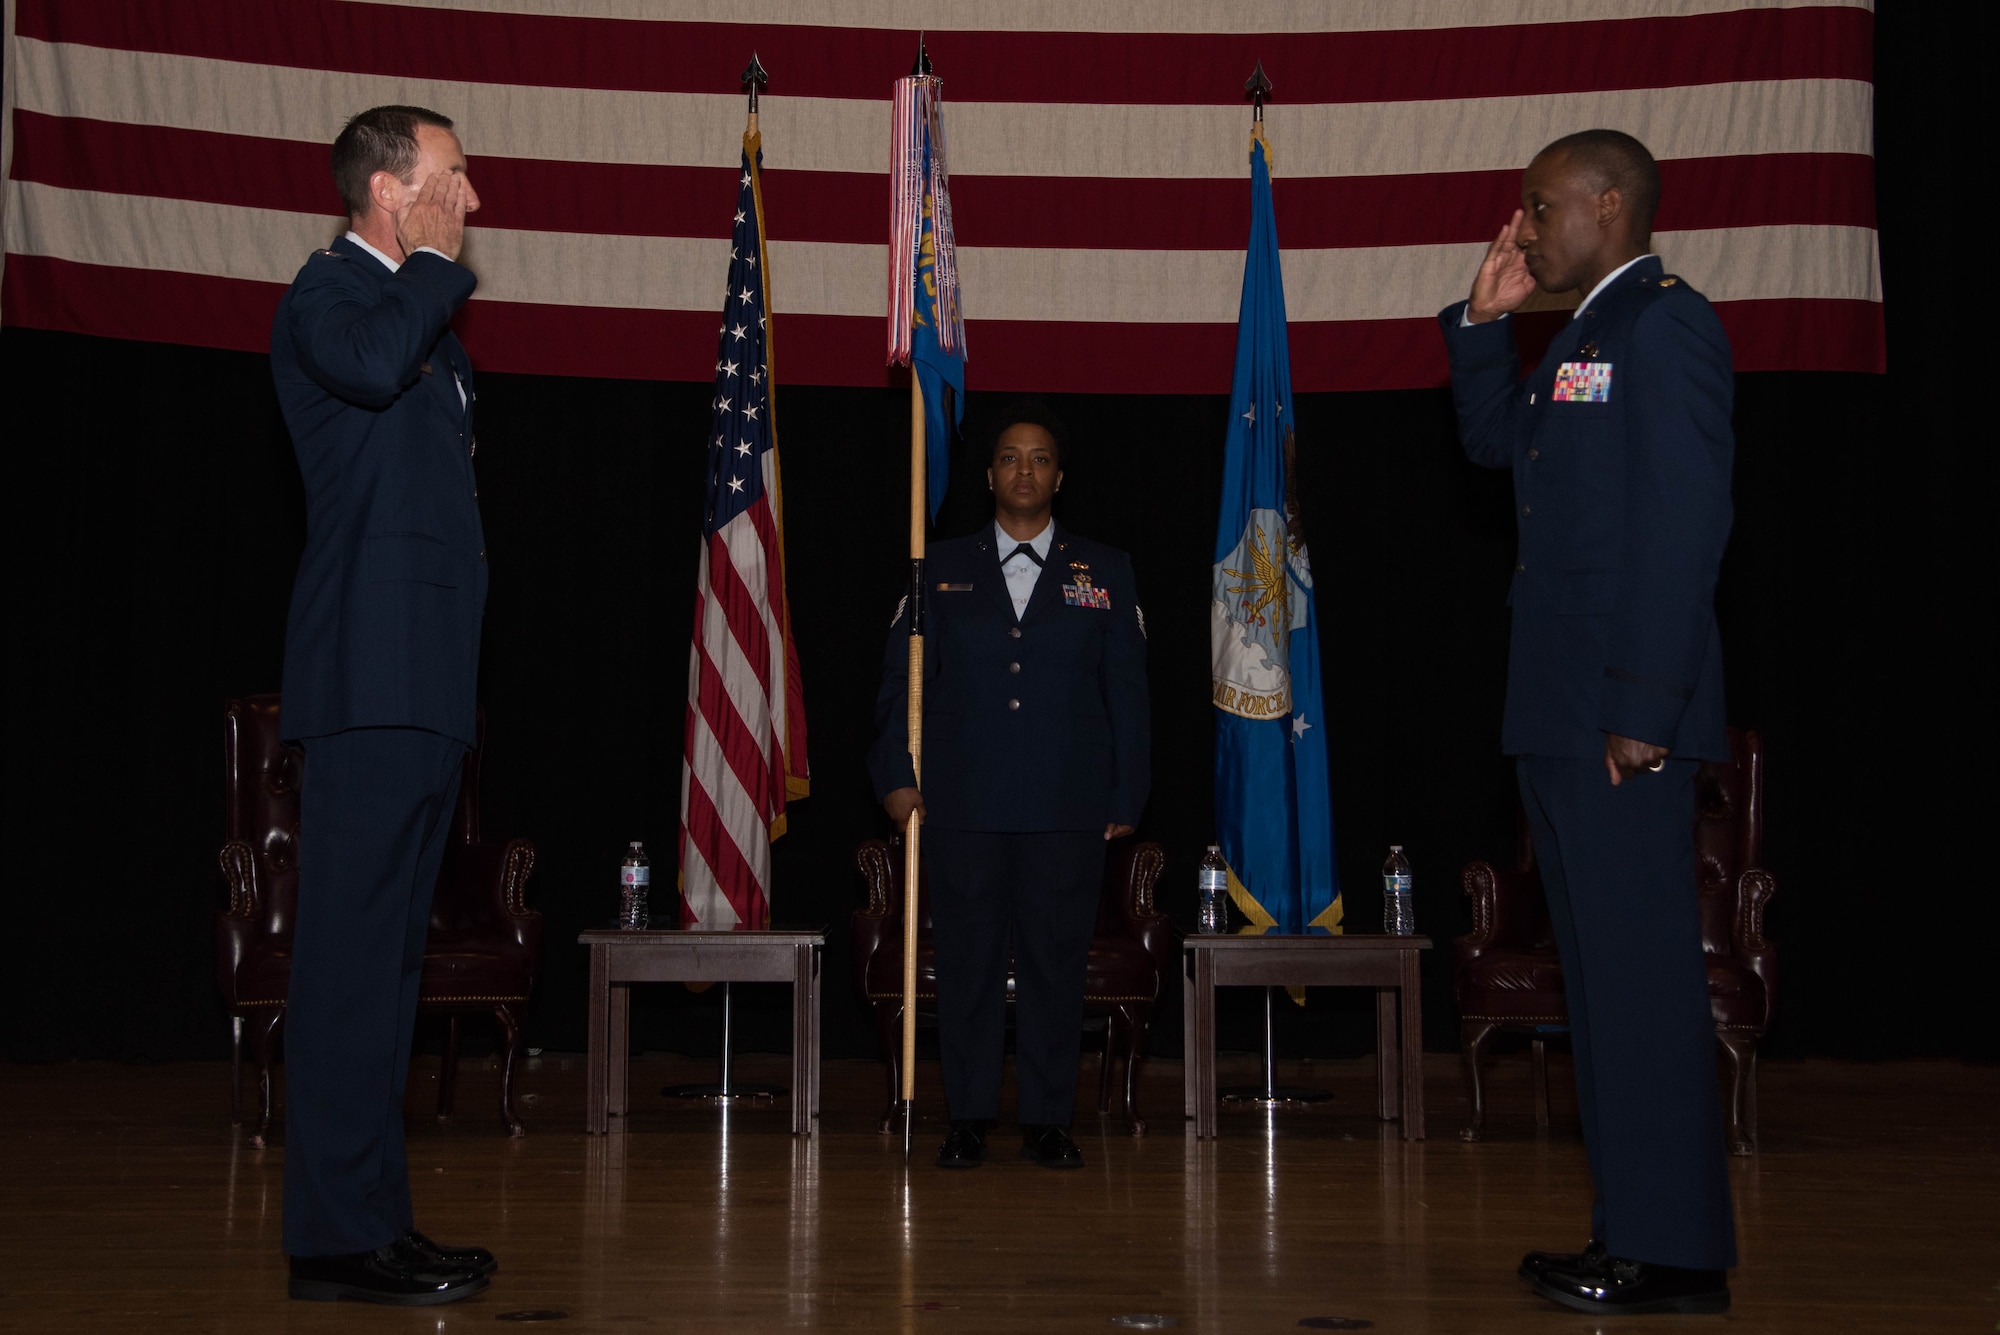 Maj. Kenneth Hawkins, 22nd Contracting Squadron incoming commander, right, assumes command during a change of command ceremony June 18, 2020, at McConnell Air Force Base, Kansas. Hawkins will ensure the 22nd CONS will continue to develop superior contracting professionals and provide exceptional business solutions and capabilities. Hawkins was formerly a contracting staff officer at MacDill Air Force Base, Florida, before assuming command of the 22nd CONS. (U.S. Air Force photo by Airman 1st Class Marc A. Garcia)